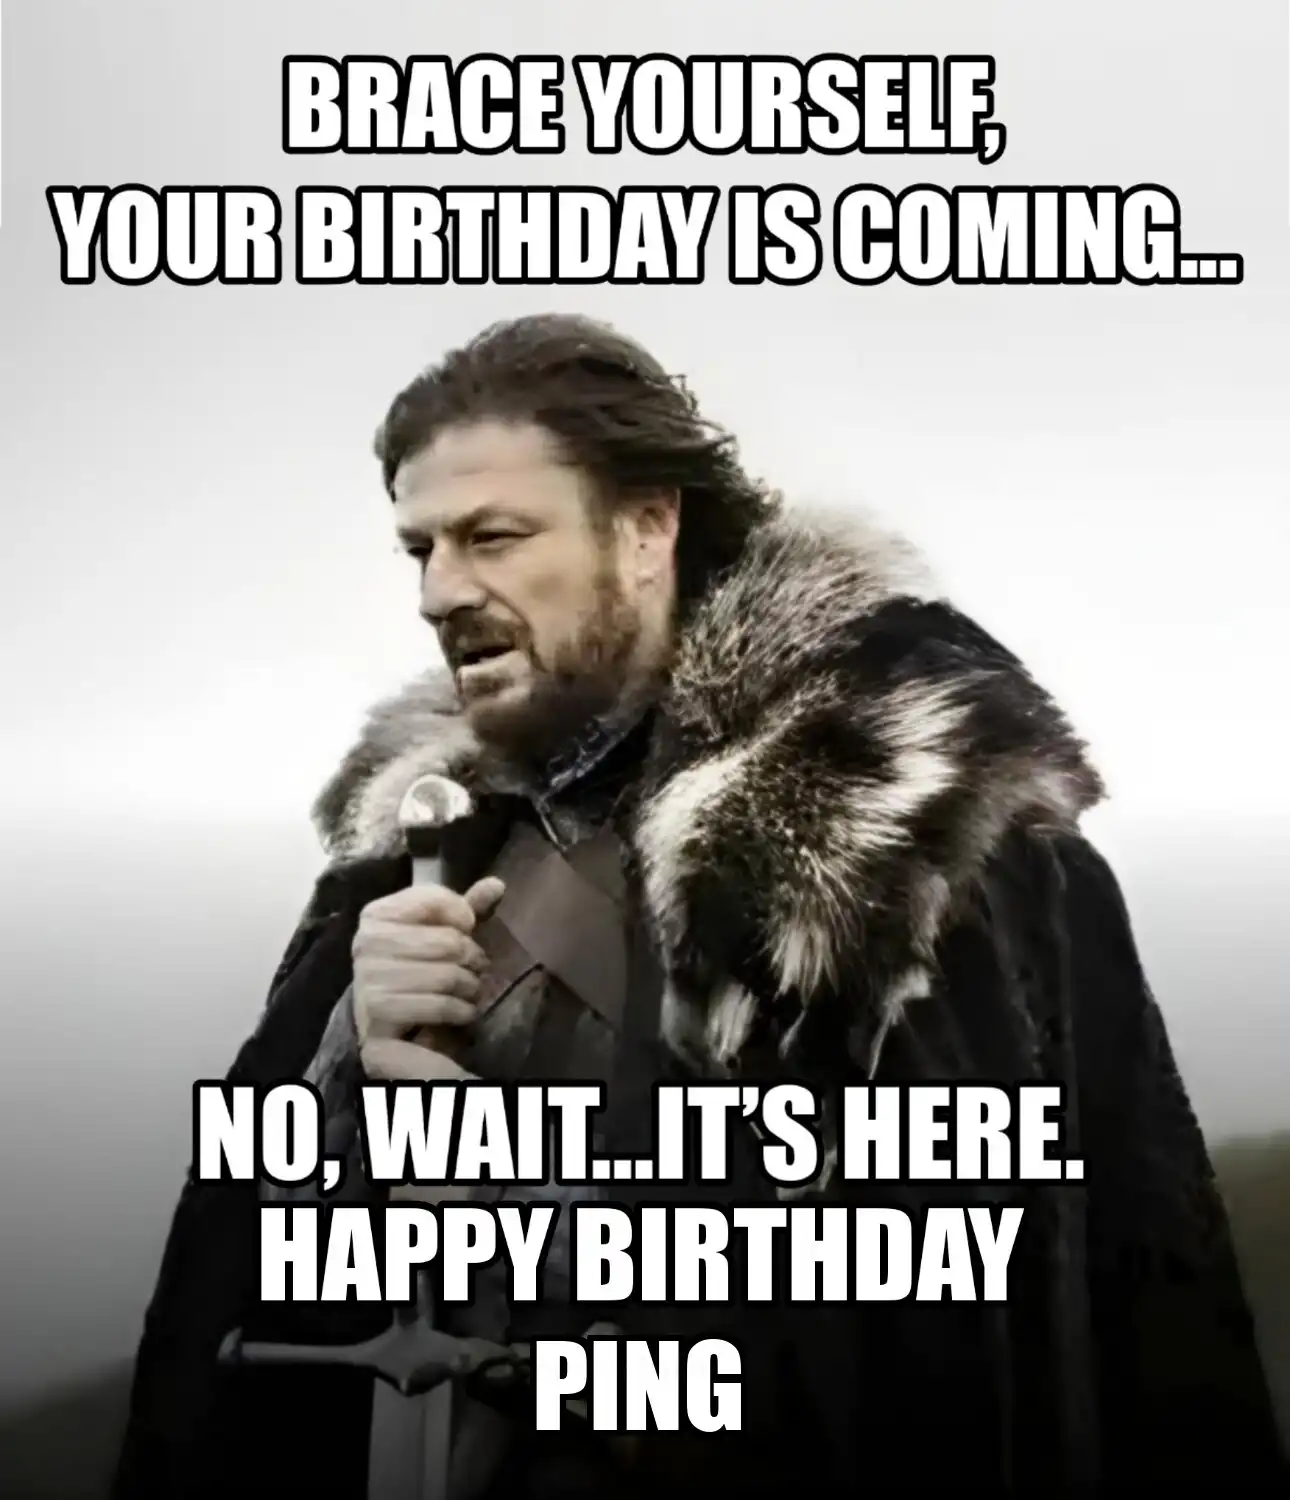 Happy Birthday Ping Brace Yourself Your Birthday Is Coming Meme